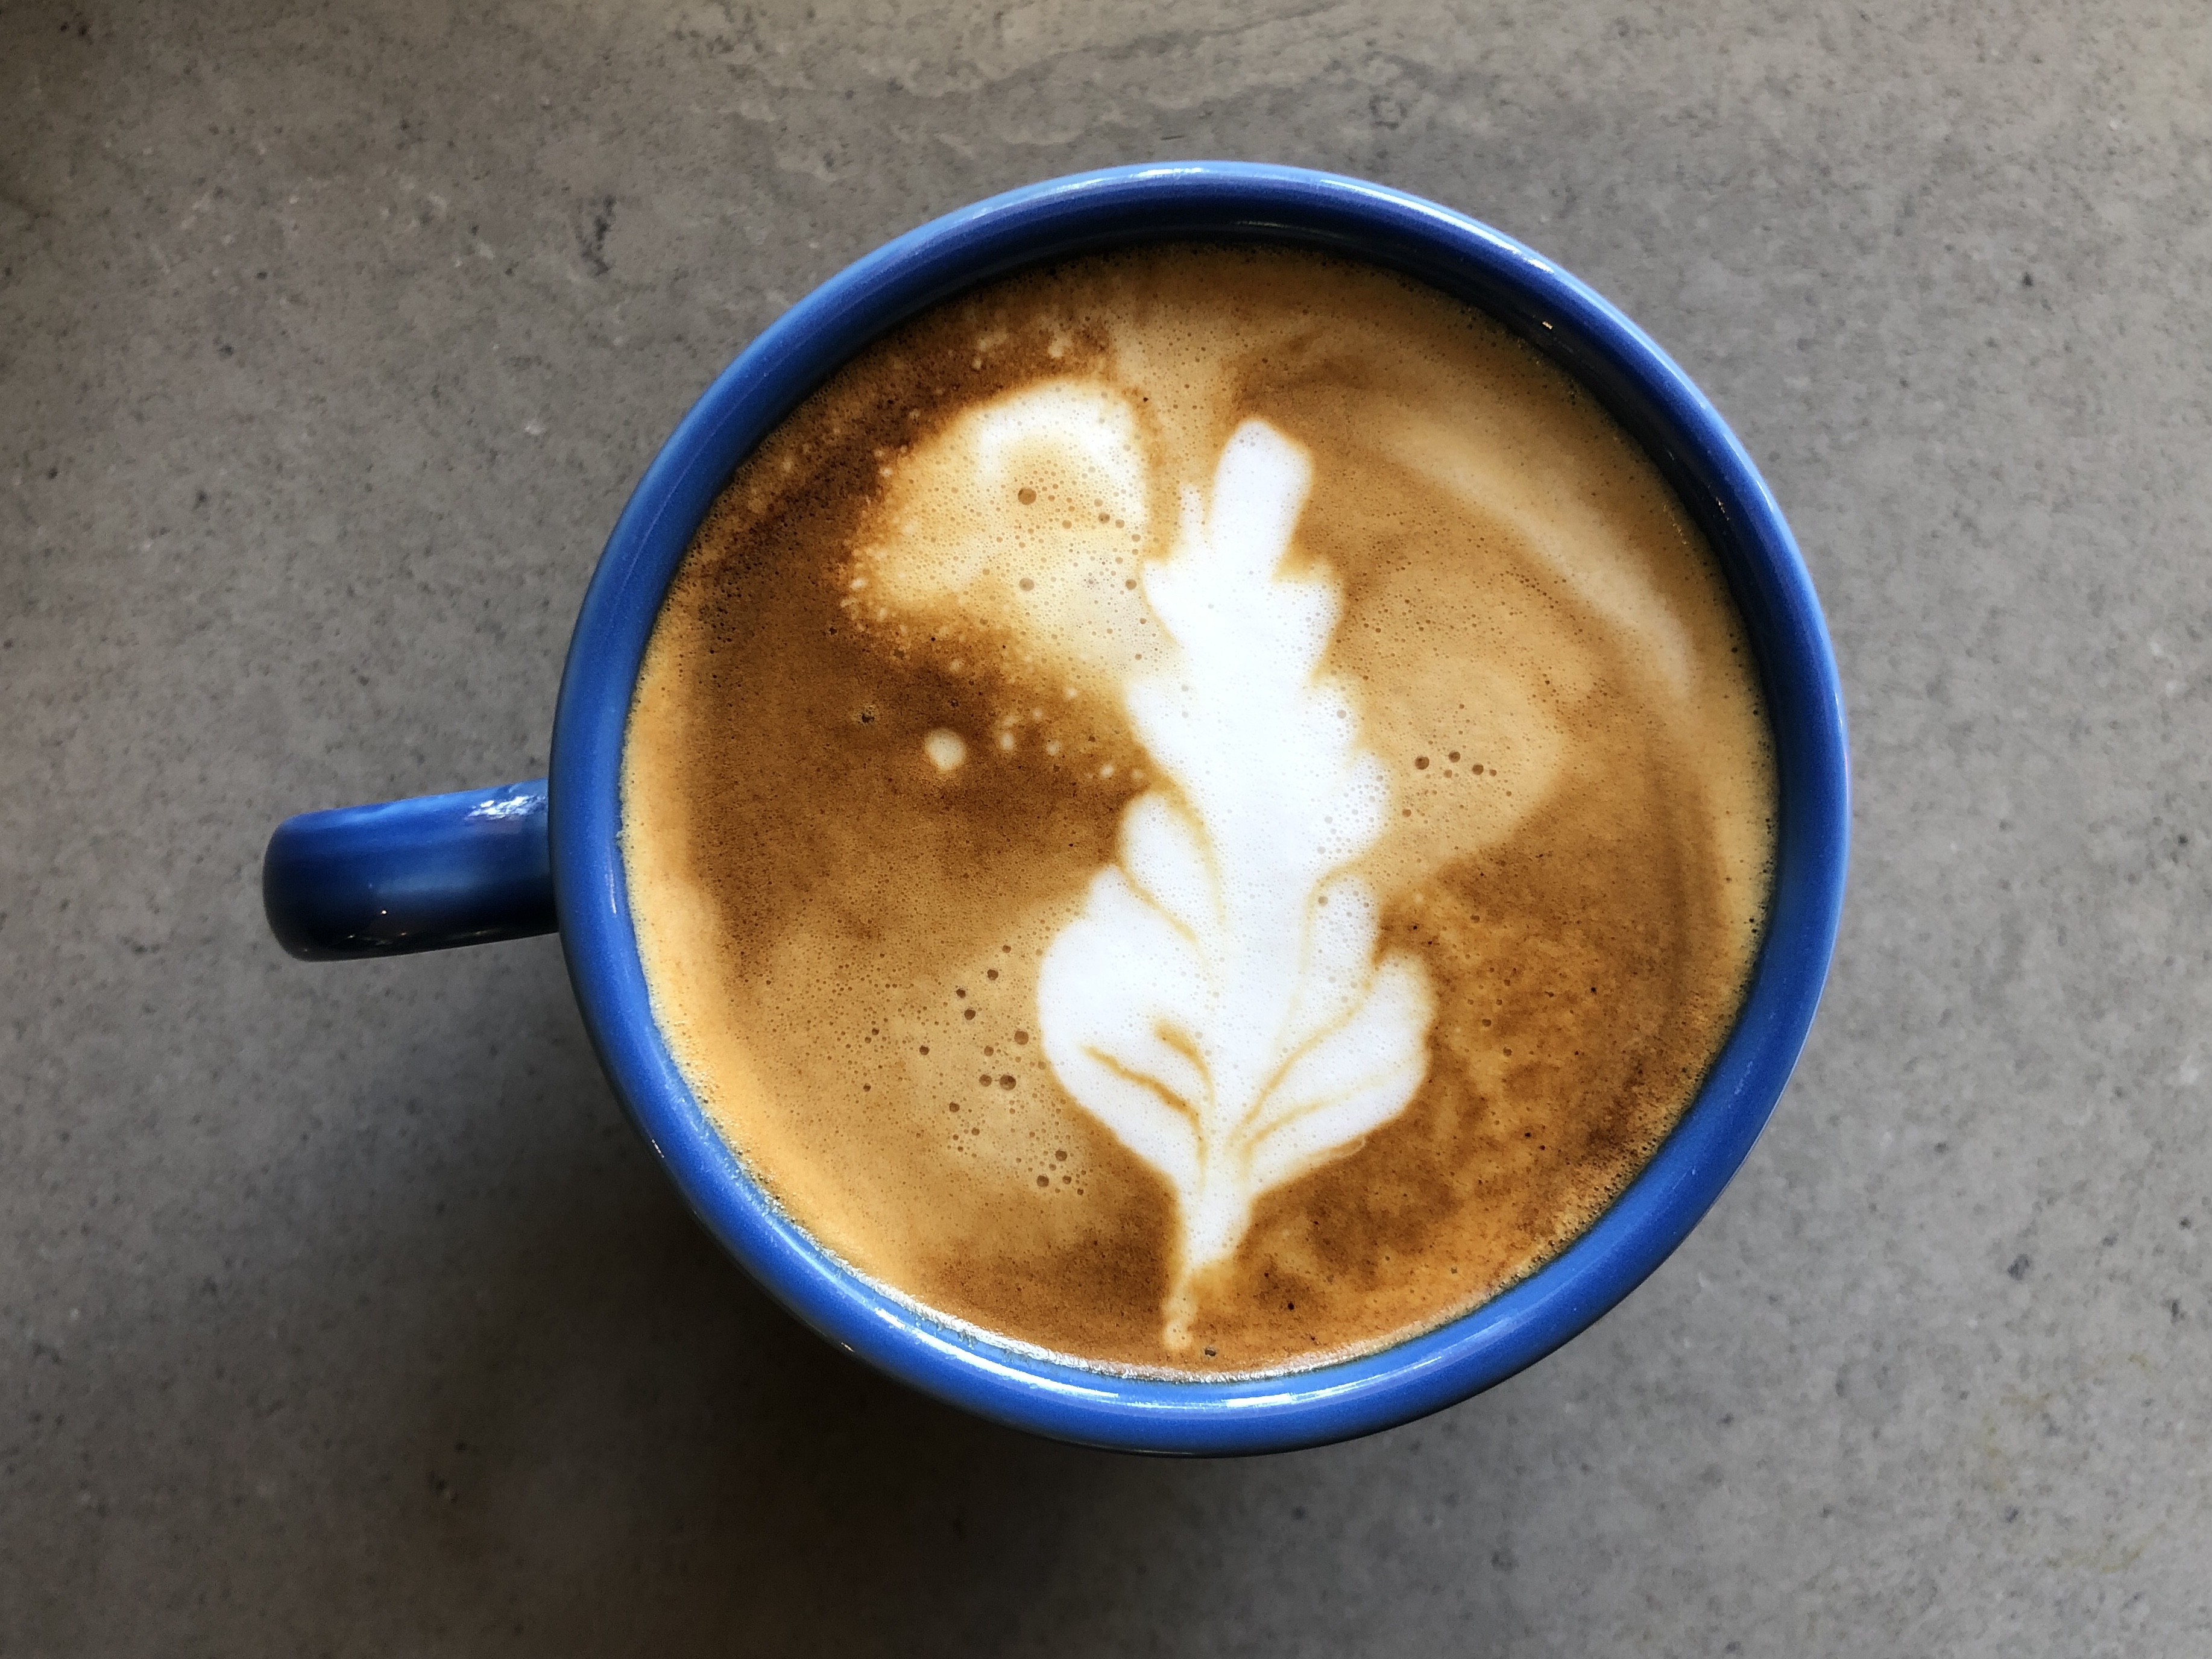 Cappuccino in a blue cup on a gray countertop. The milk is poured in a thin oak leaf shape.  